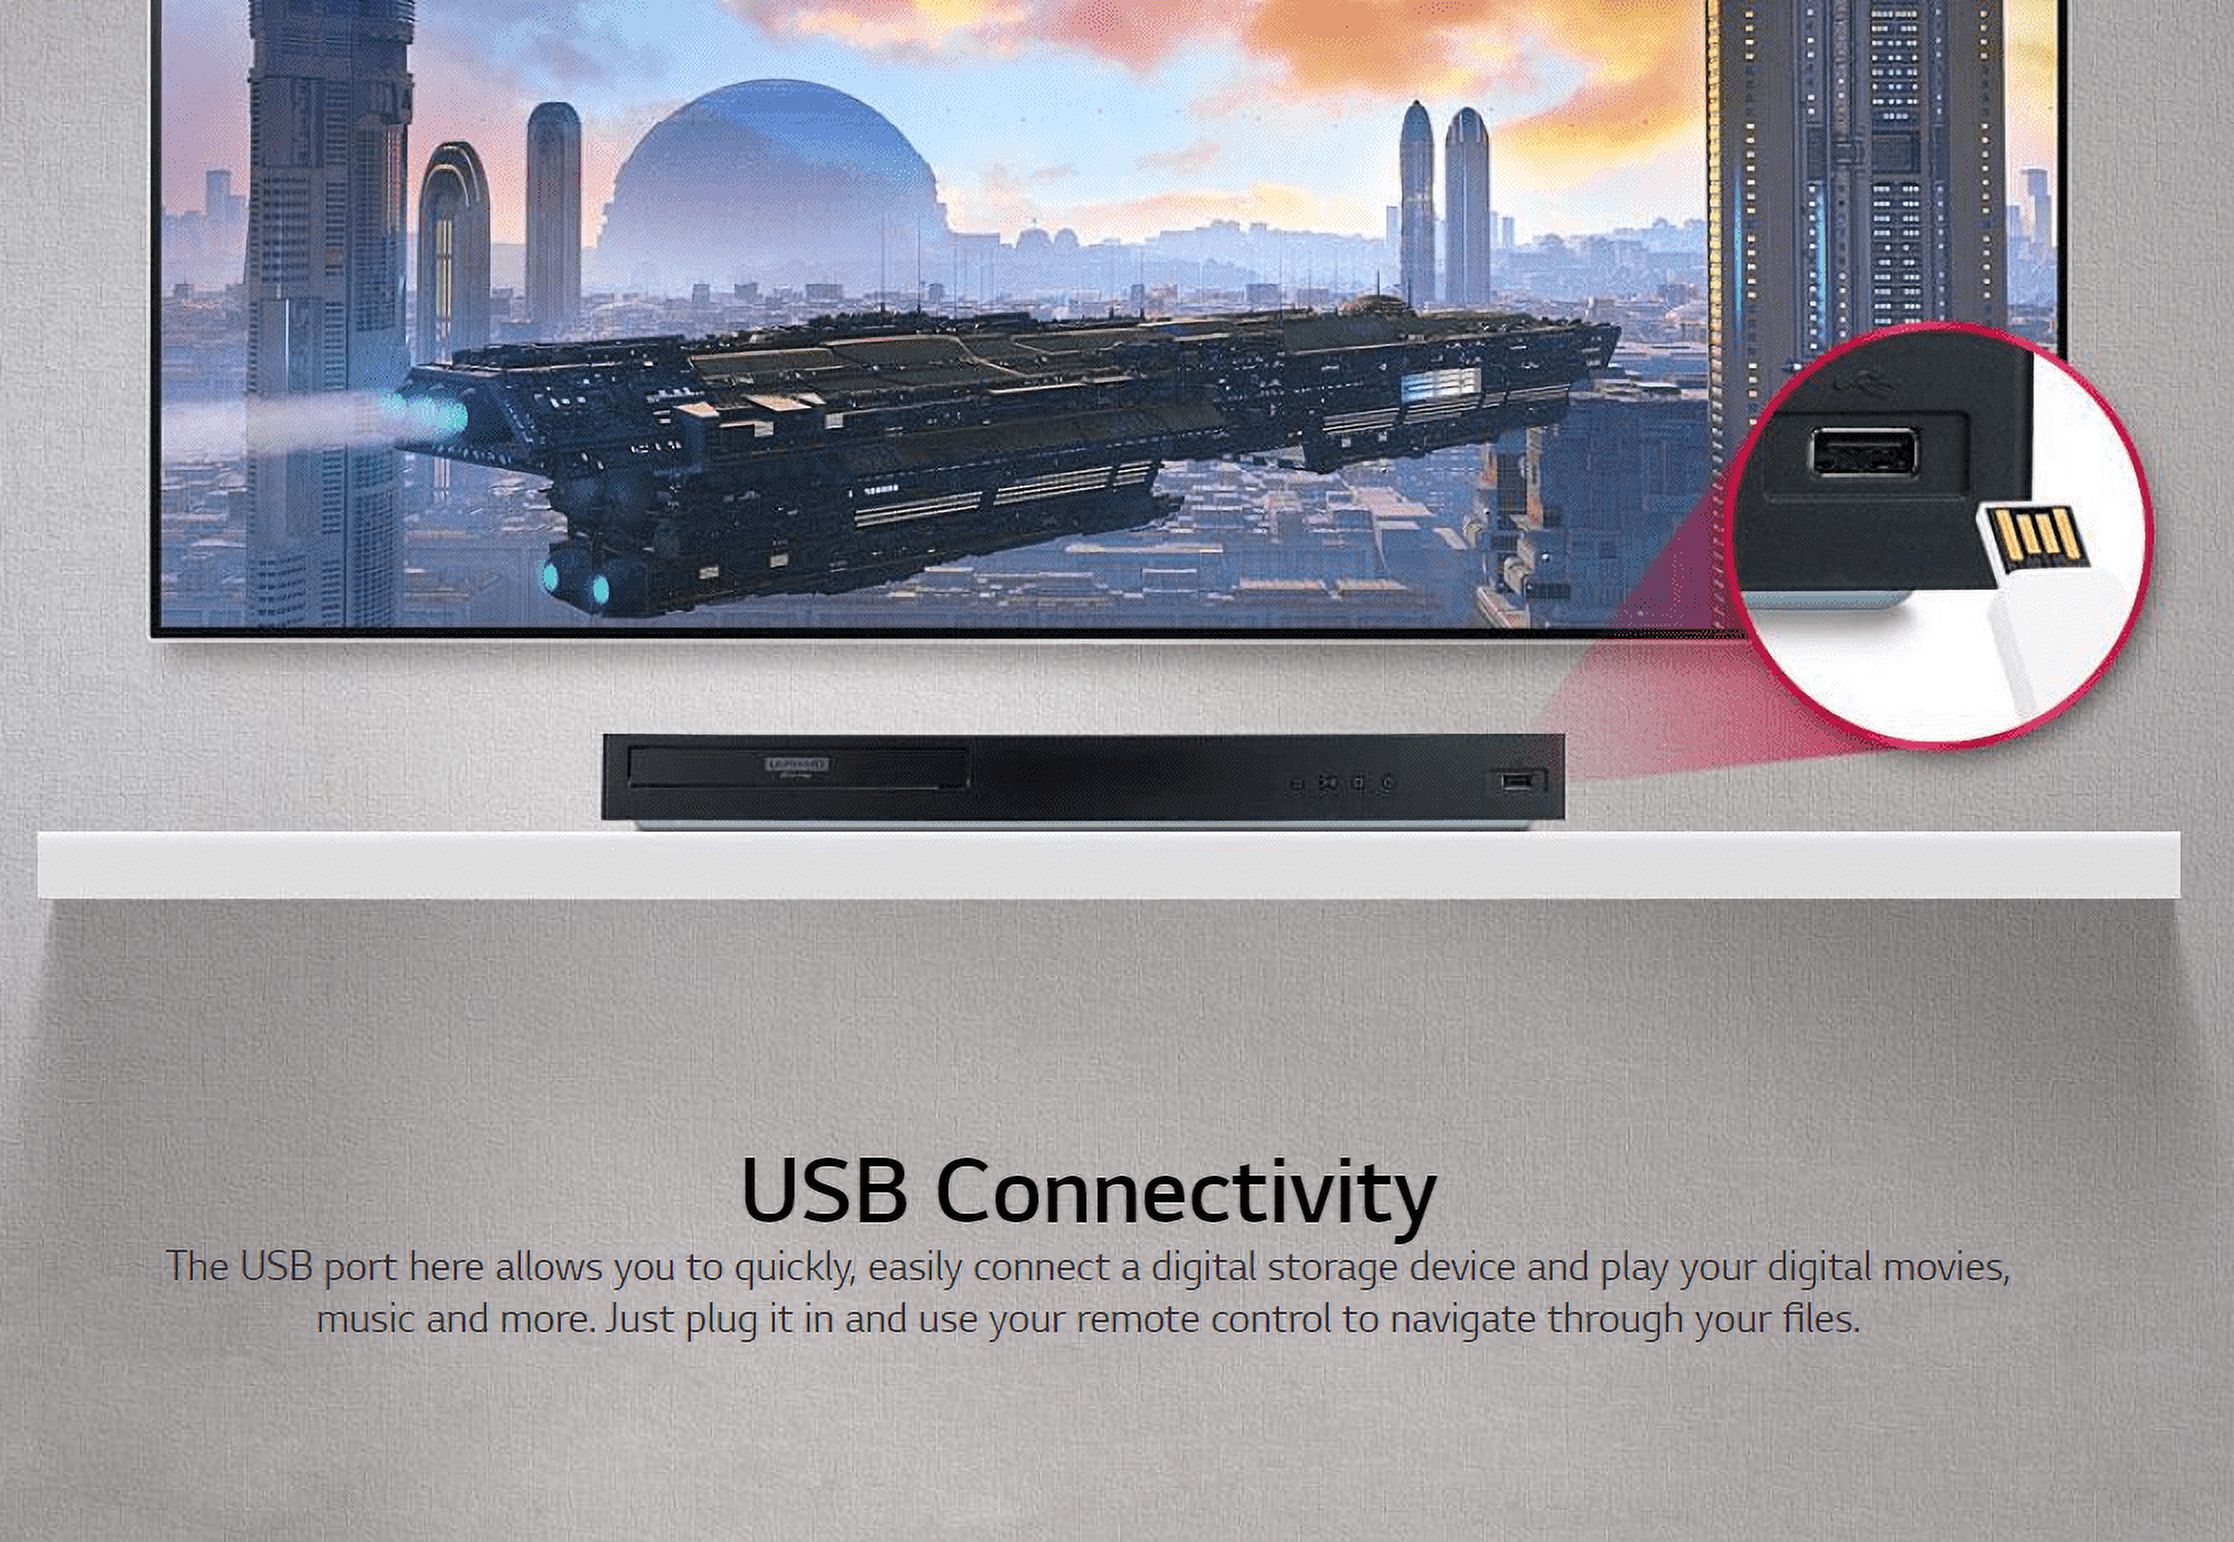 LG UBK90 4K Ultra HD HDR Dolby Vision Blu-ray Player - image 5 of 10